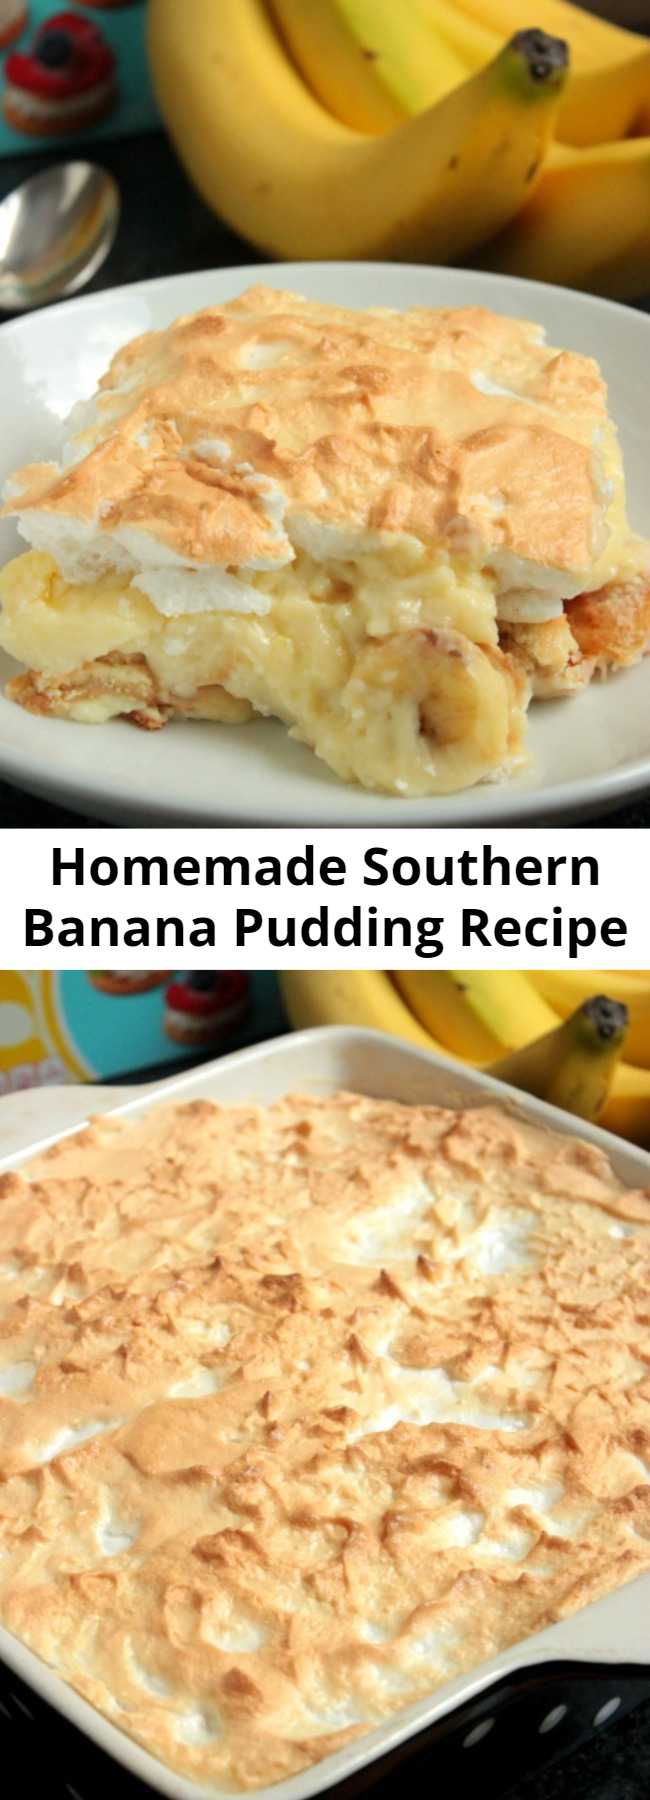 Homemade Southern Banana Pudding Recipe - Serve is hot or cold, this Homemade Southern Banana Pudding is going to be loved by all! Roasting the banana gives it a richer banana flavor too!